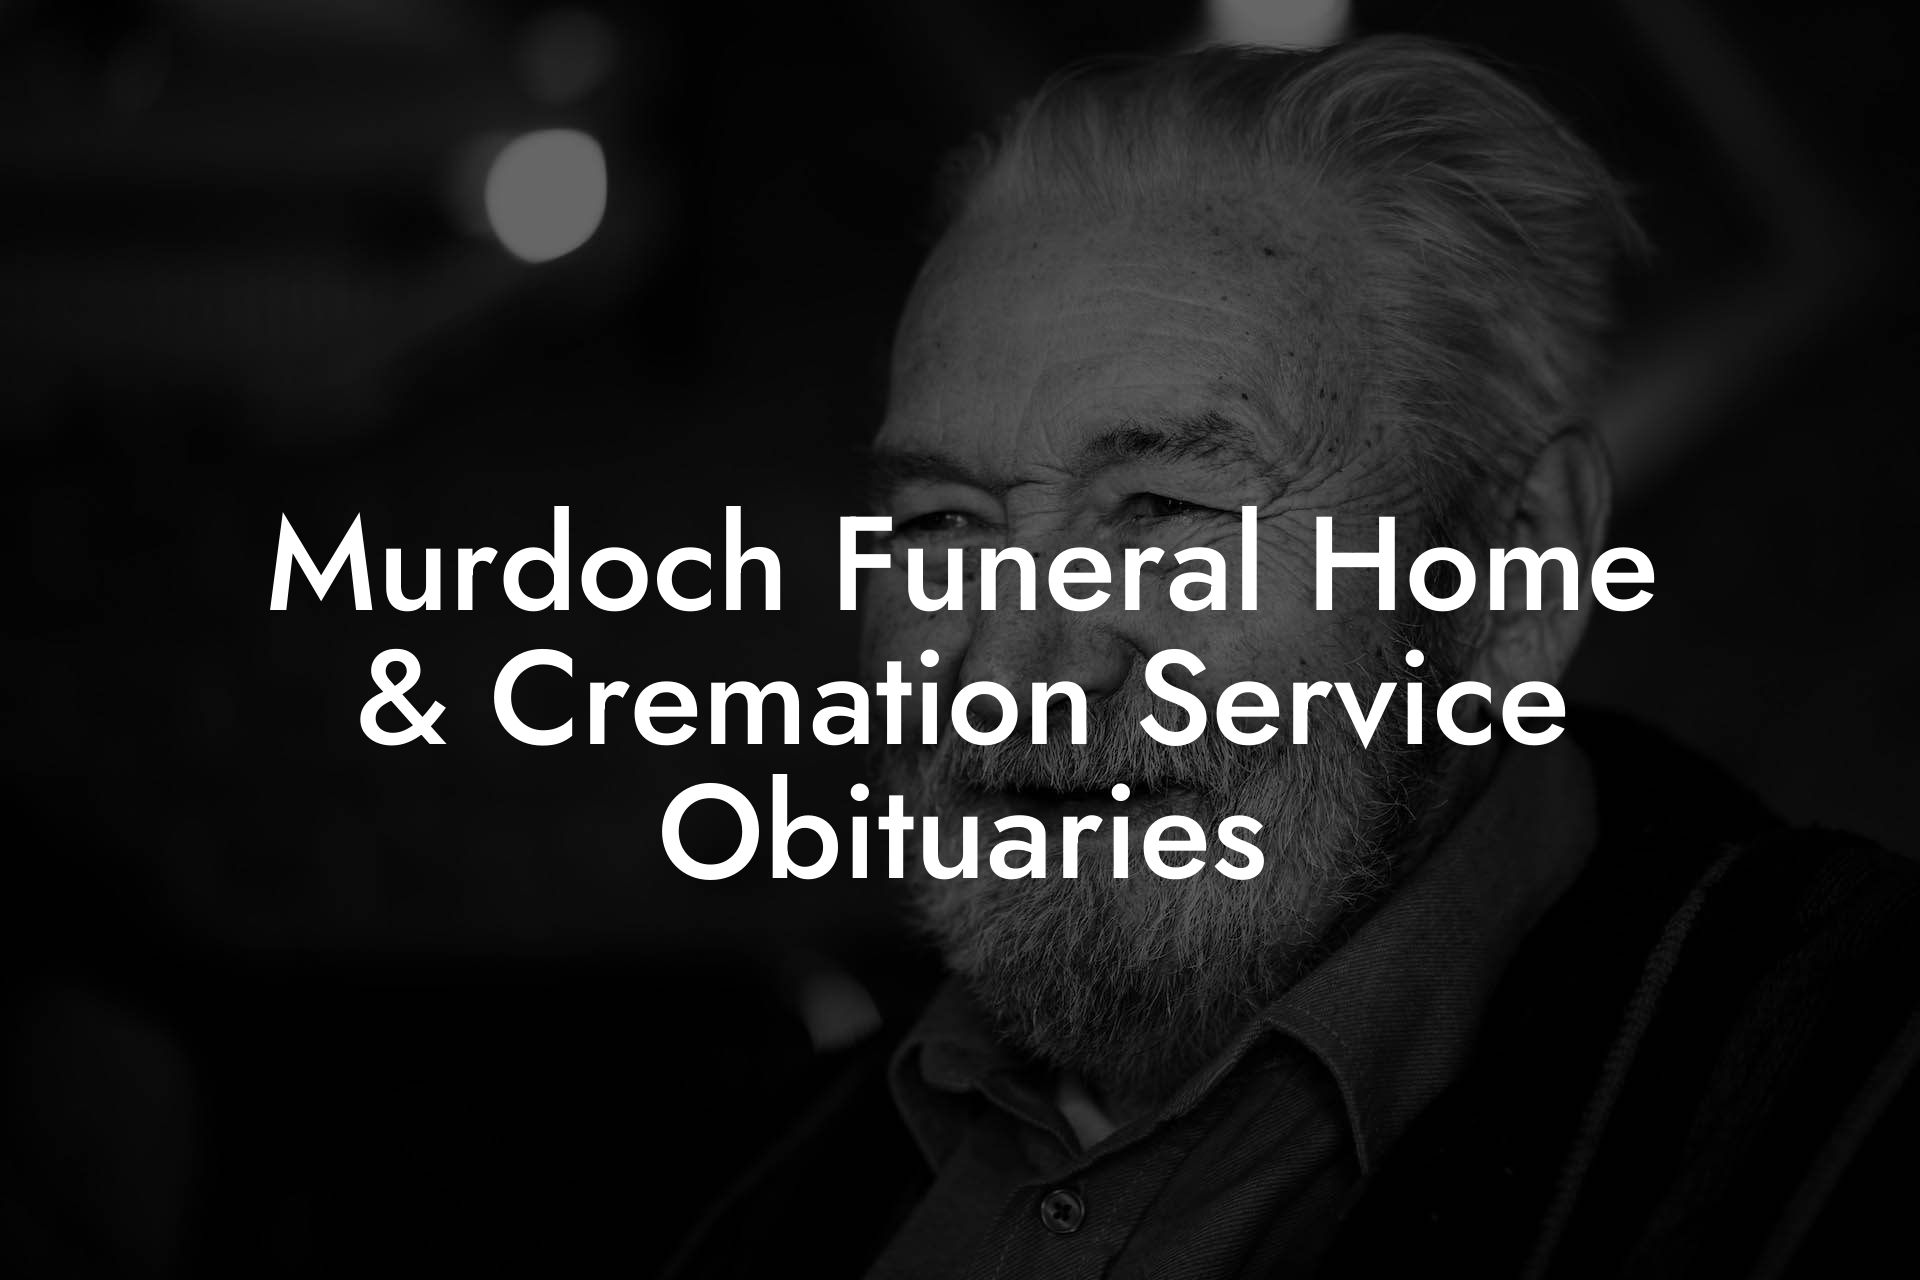 Murdoch Funeral Home & Cremation Service Obituaries - Eulogy Assistant